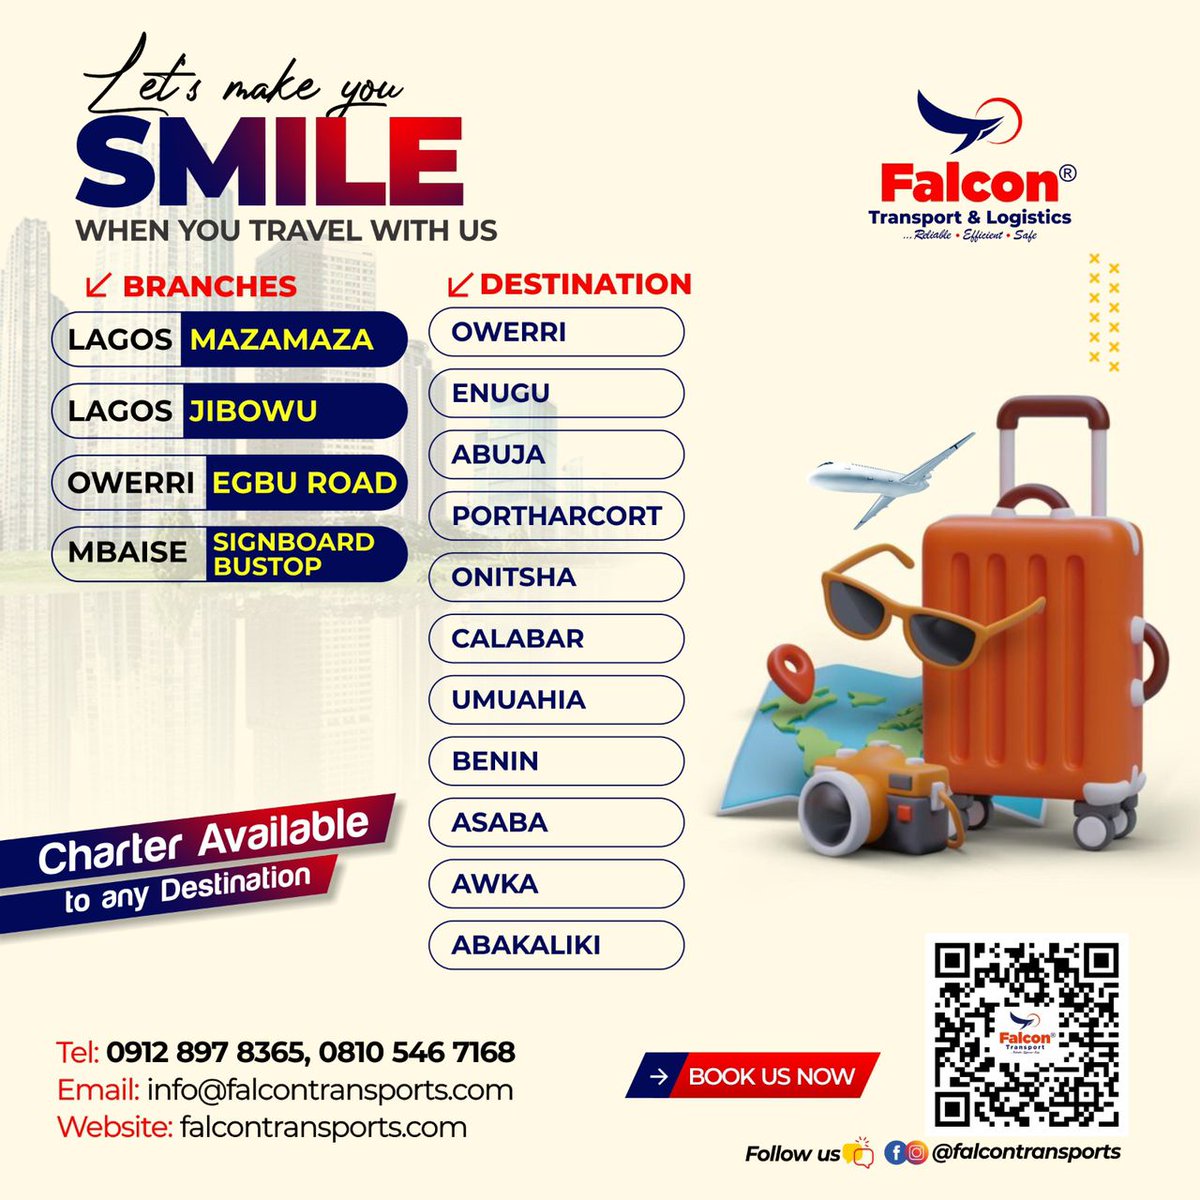 Let's make you smile when you travel with us today, Book with us now and  let's take you to your destination with ease.

Charter Services also available to any destination.
#falcontransportsandlogistics

#falcontransports 

#services

#charterservices